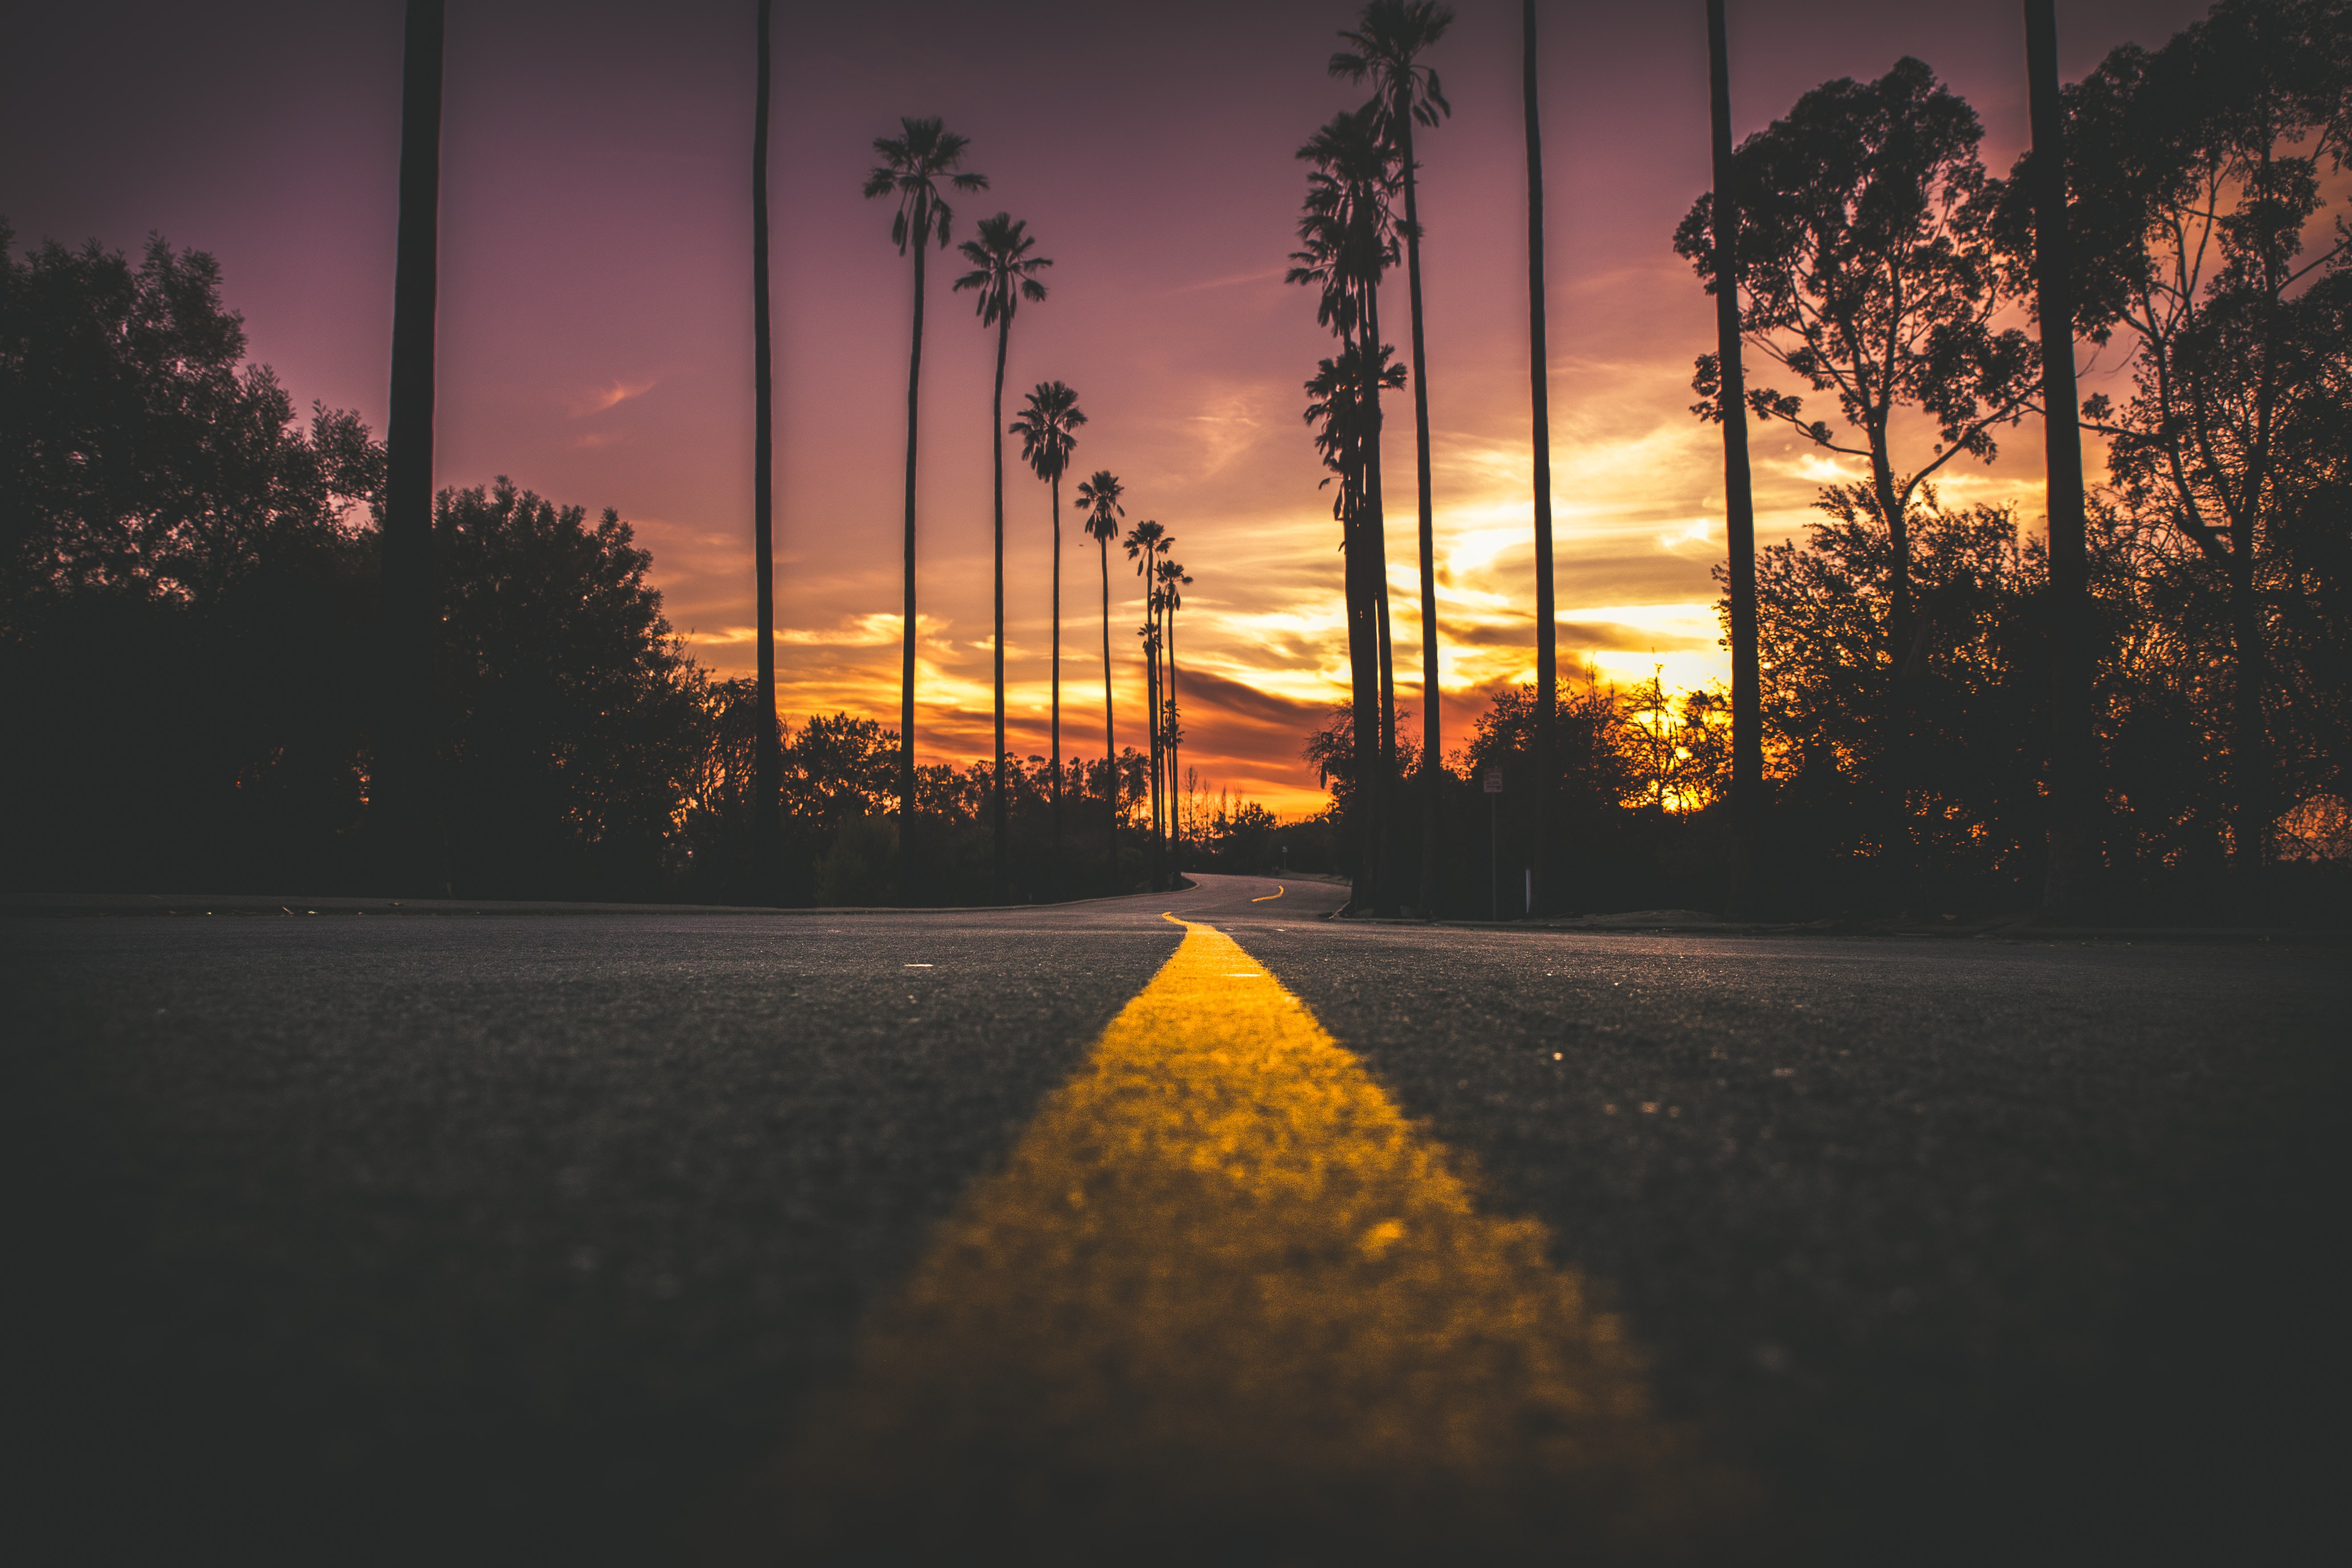 Palm Trees and a sunset over am open road.